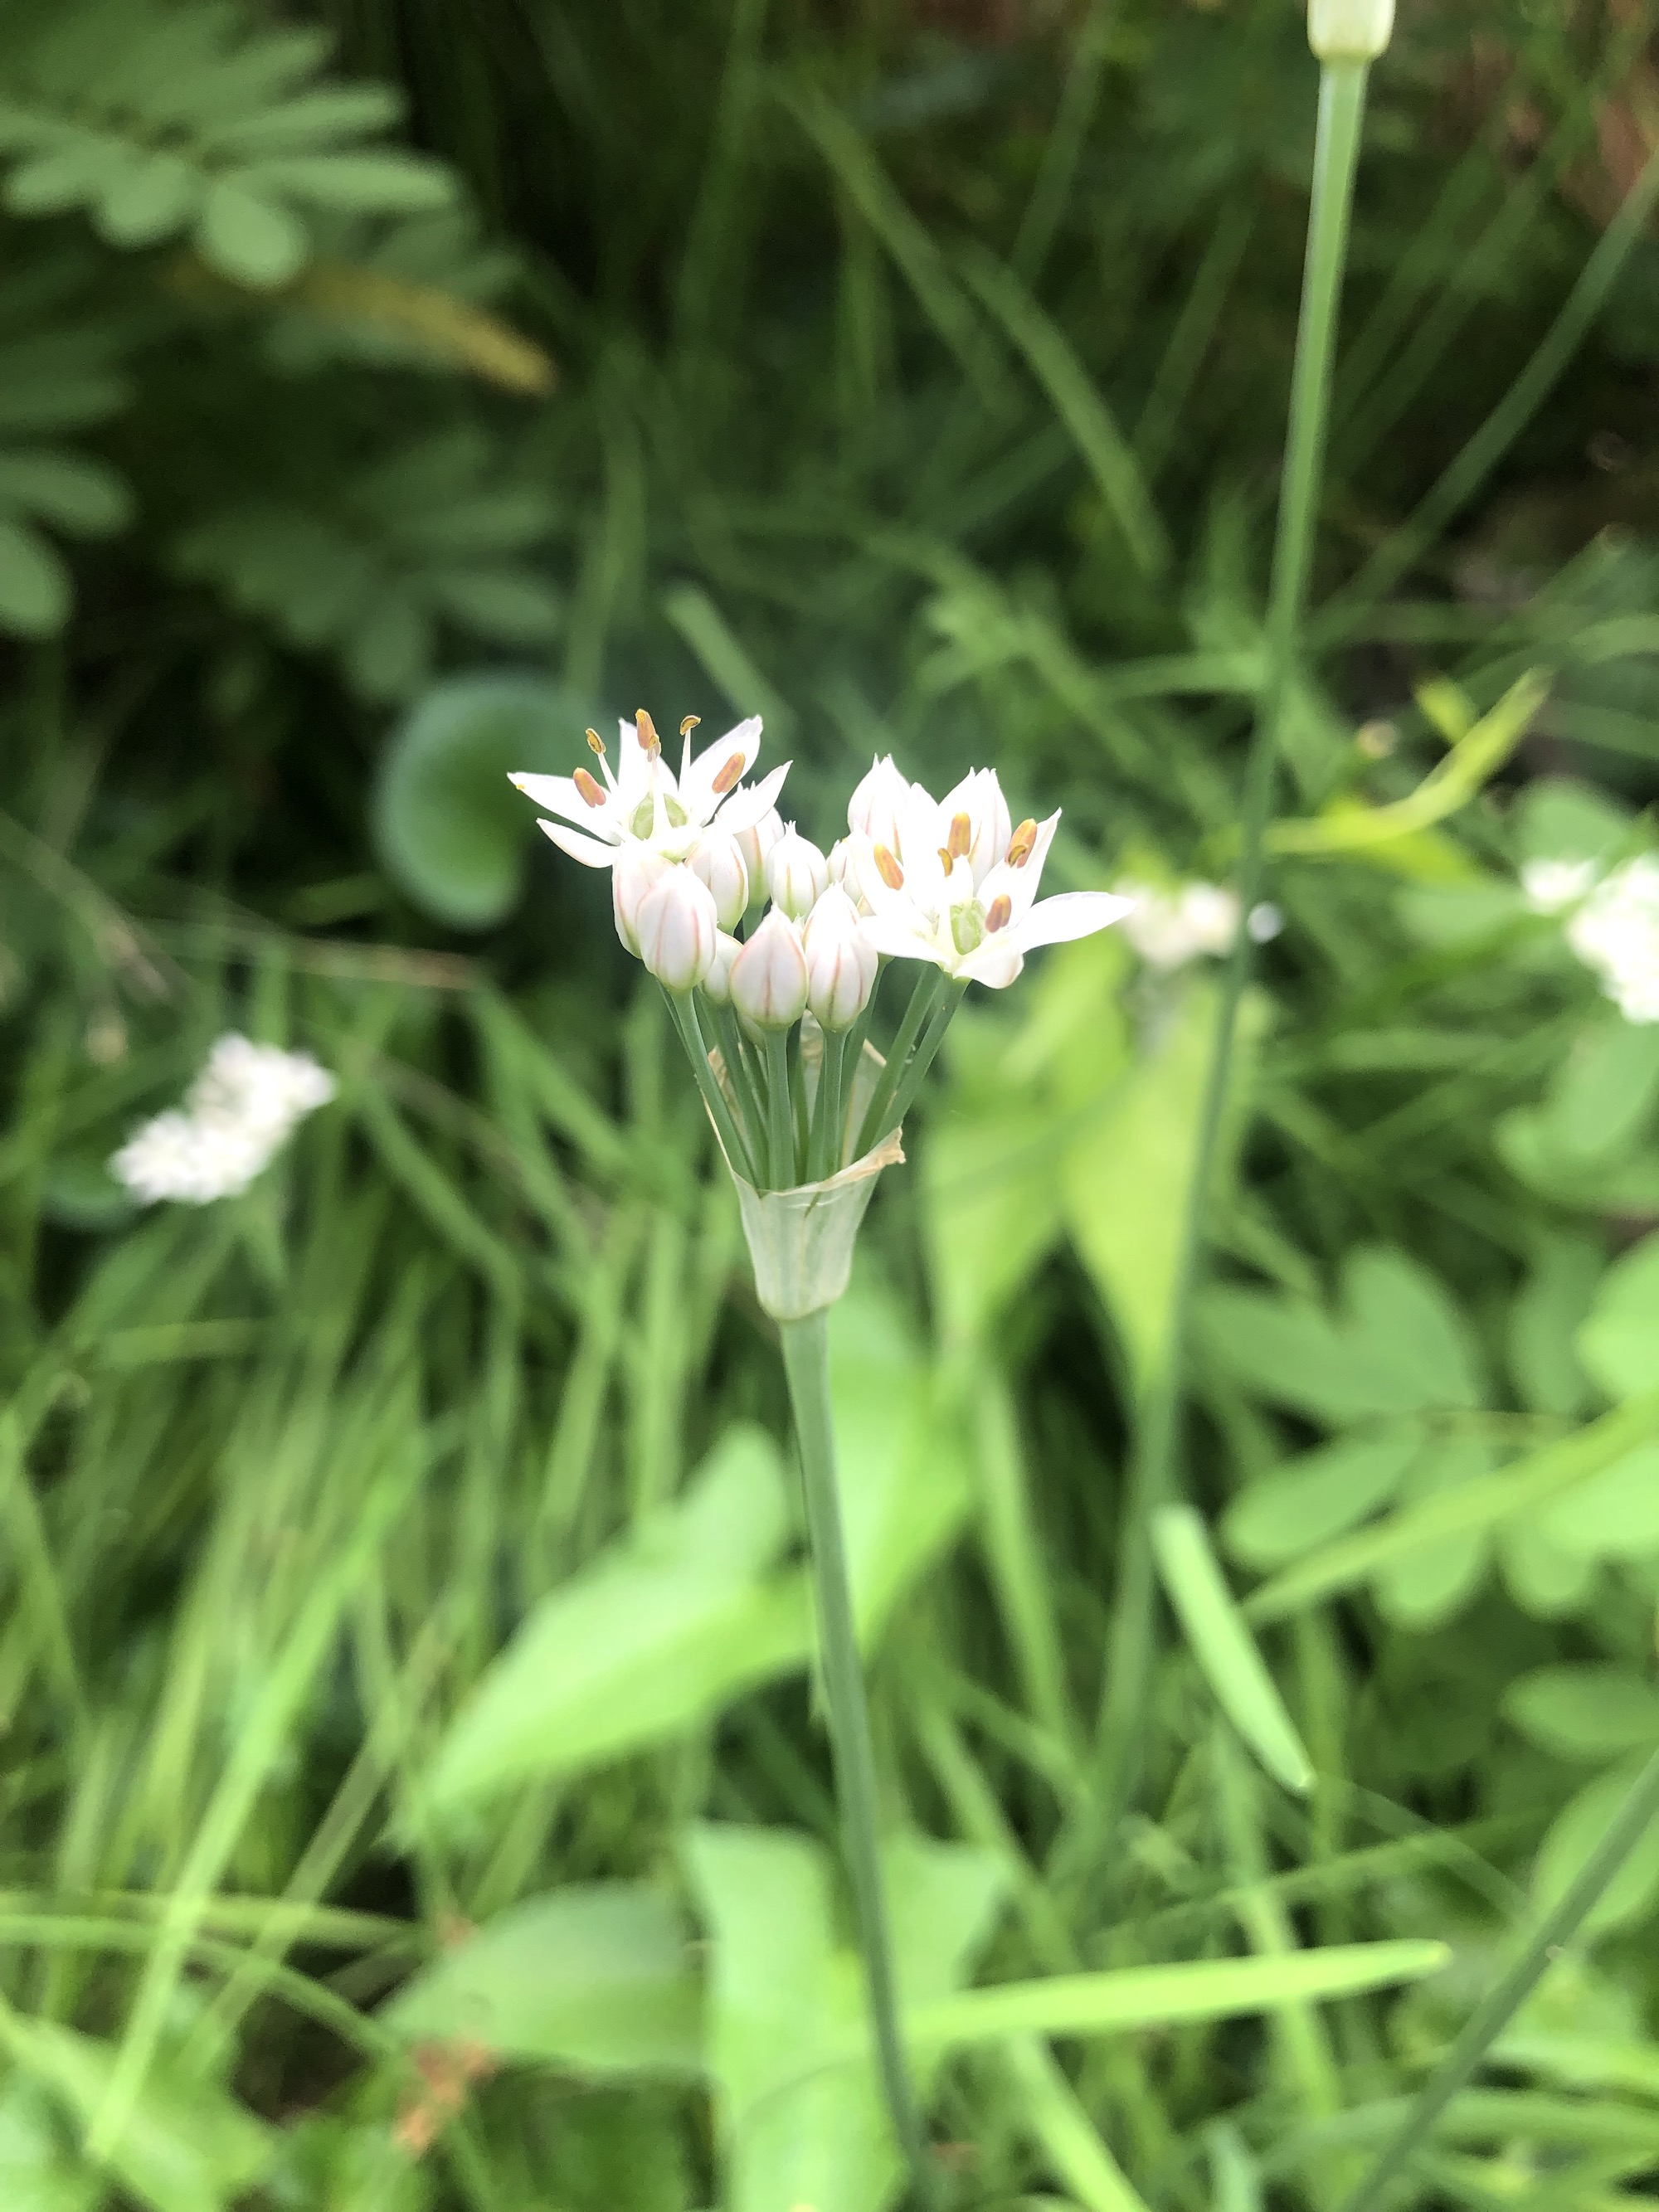 Garlic Chives in ditch along bikepath behind Fox Avenue in Madison, Wisconsin on September 5, 2022.